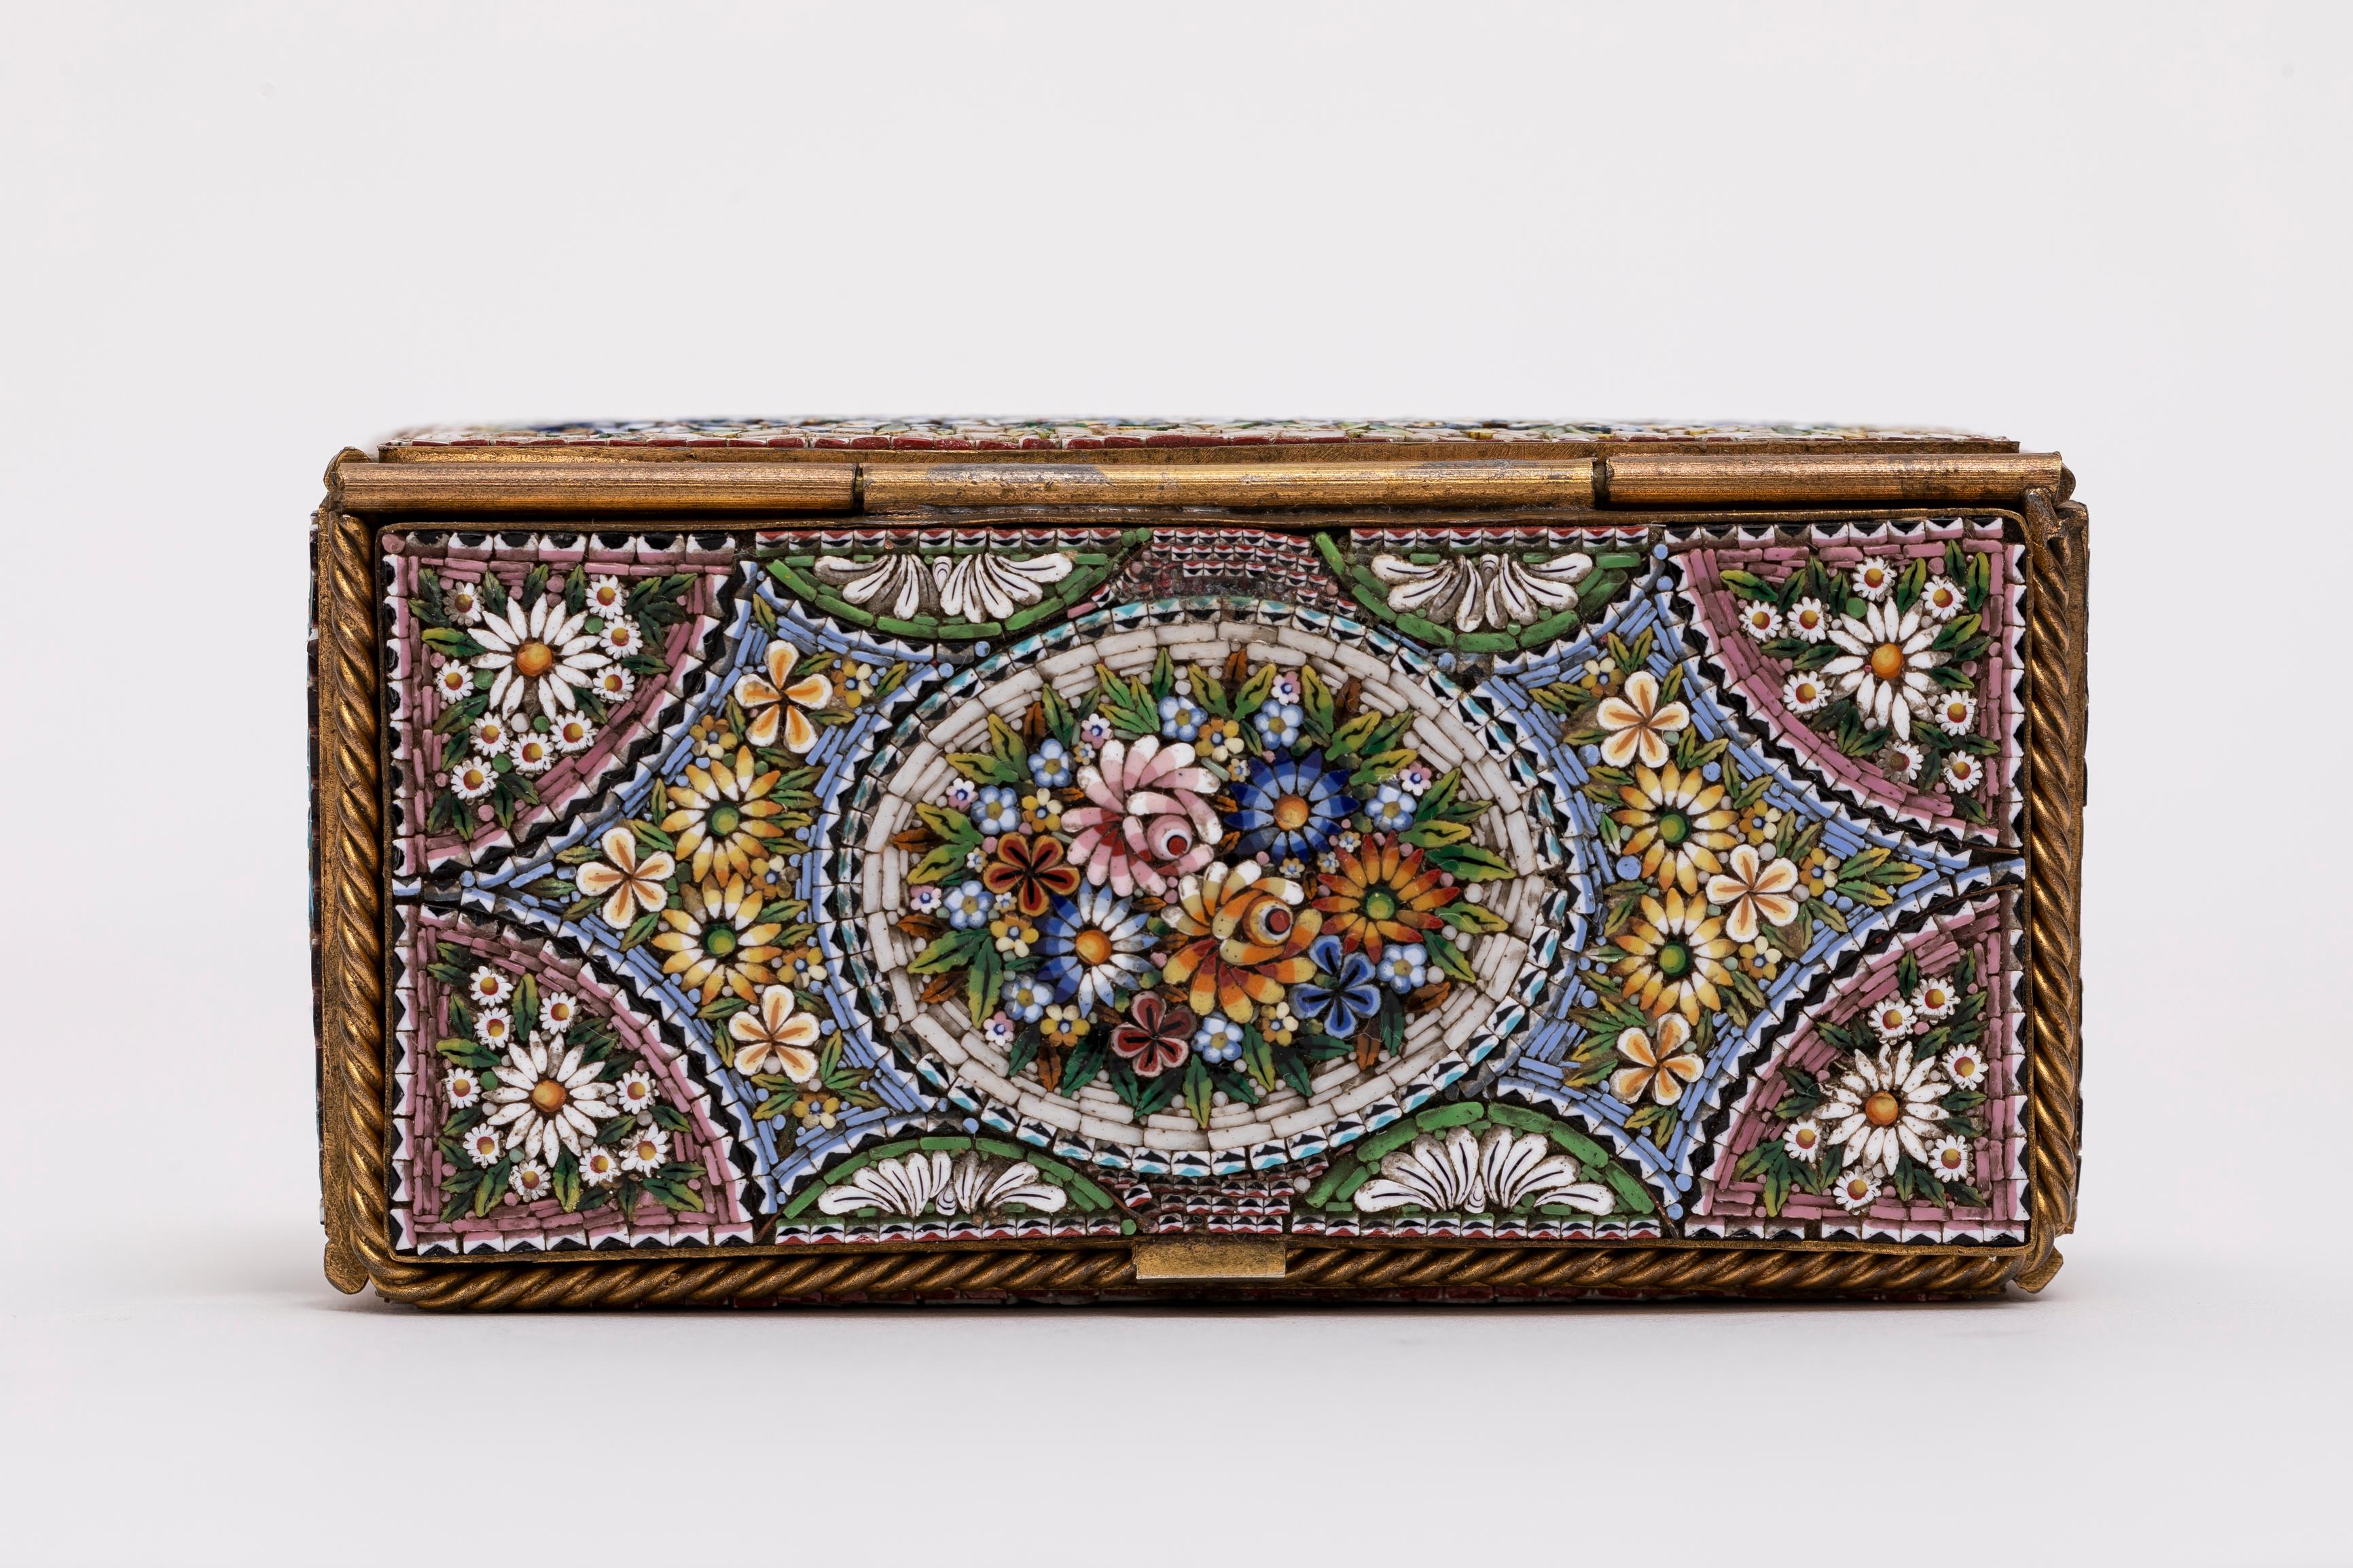 Other An Antique 19th C. Italian Micro Mosaic Floral Motif Jewelry Box For Sale